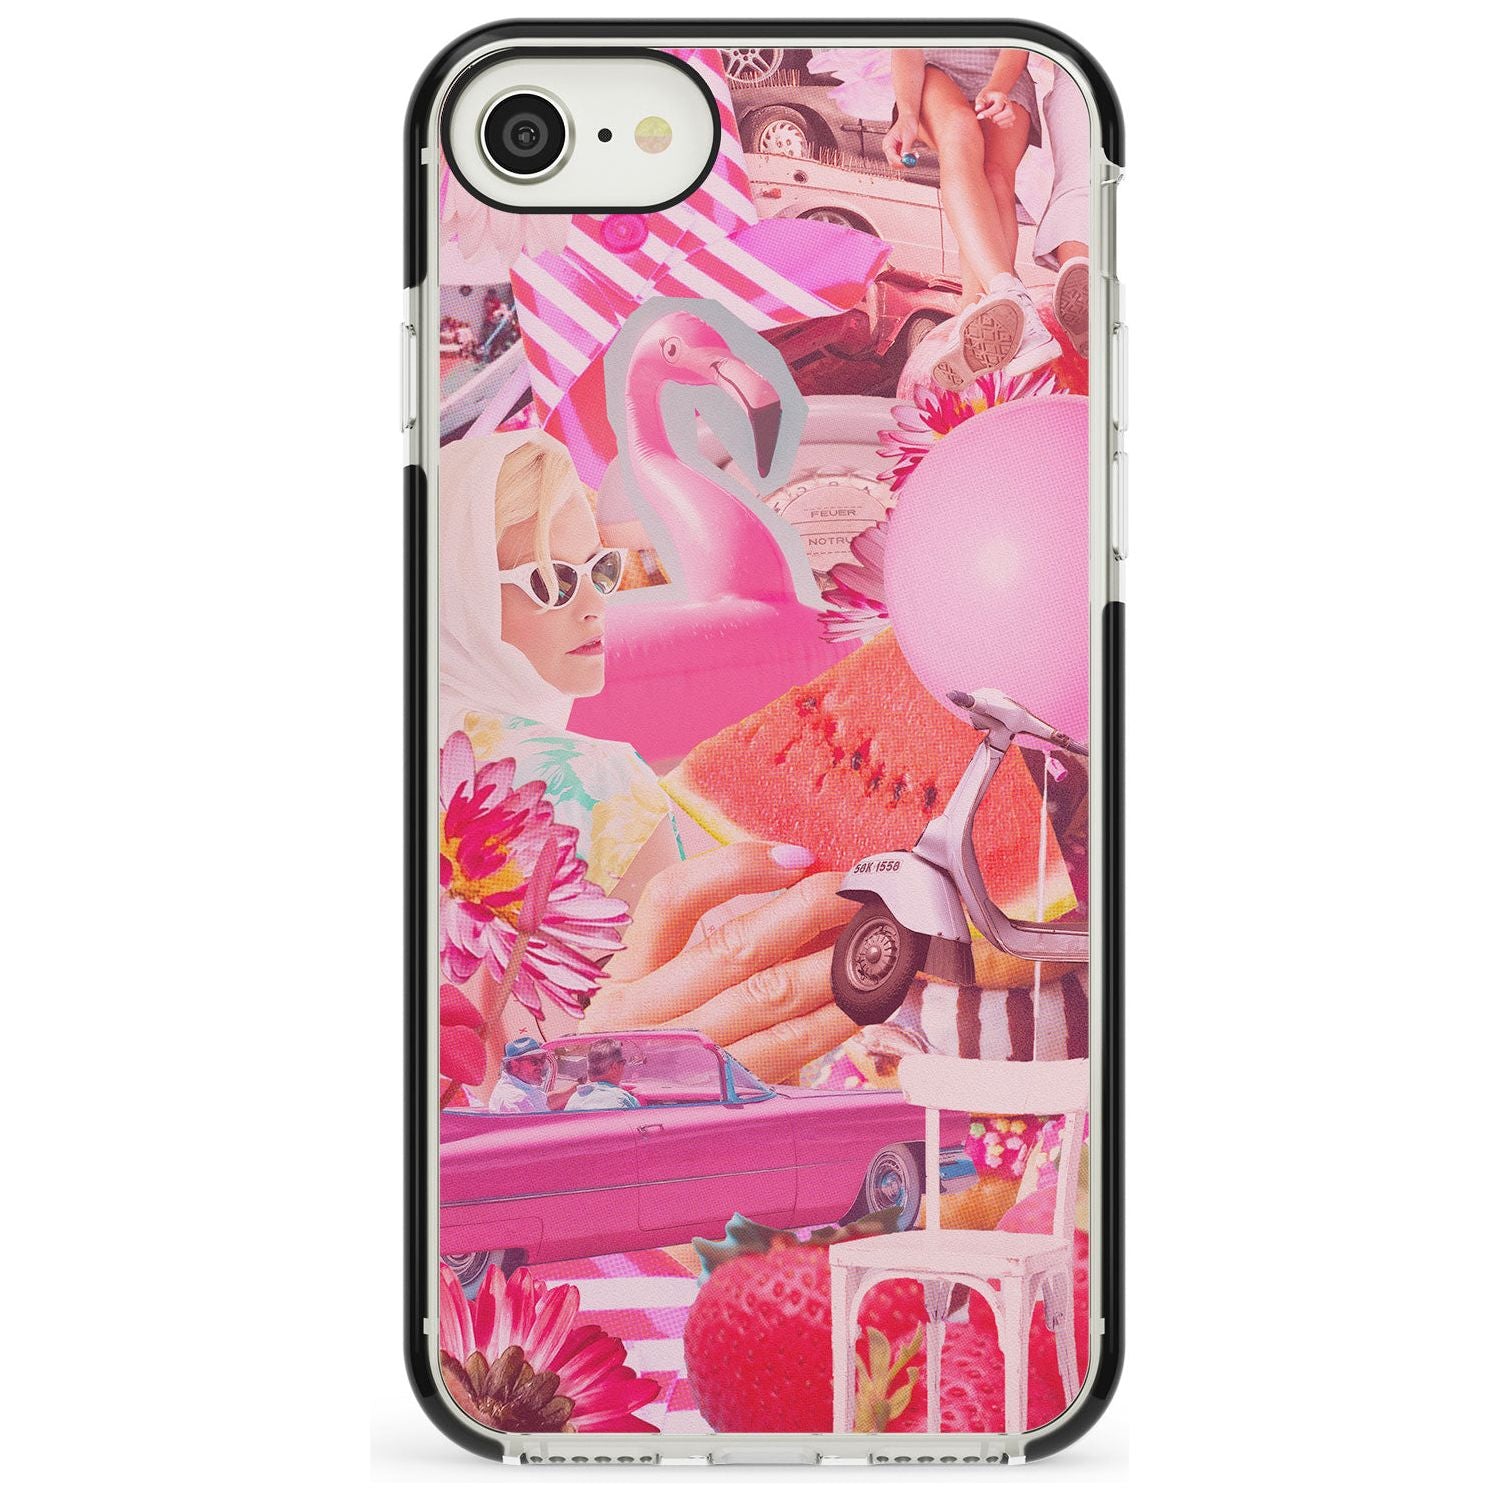 Vintage Collage: Pink Glamour Black Impact Phone Case for iPhone SE 8 7 Plus